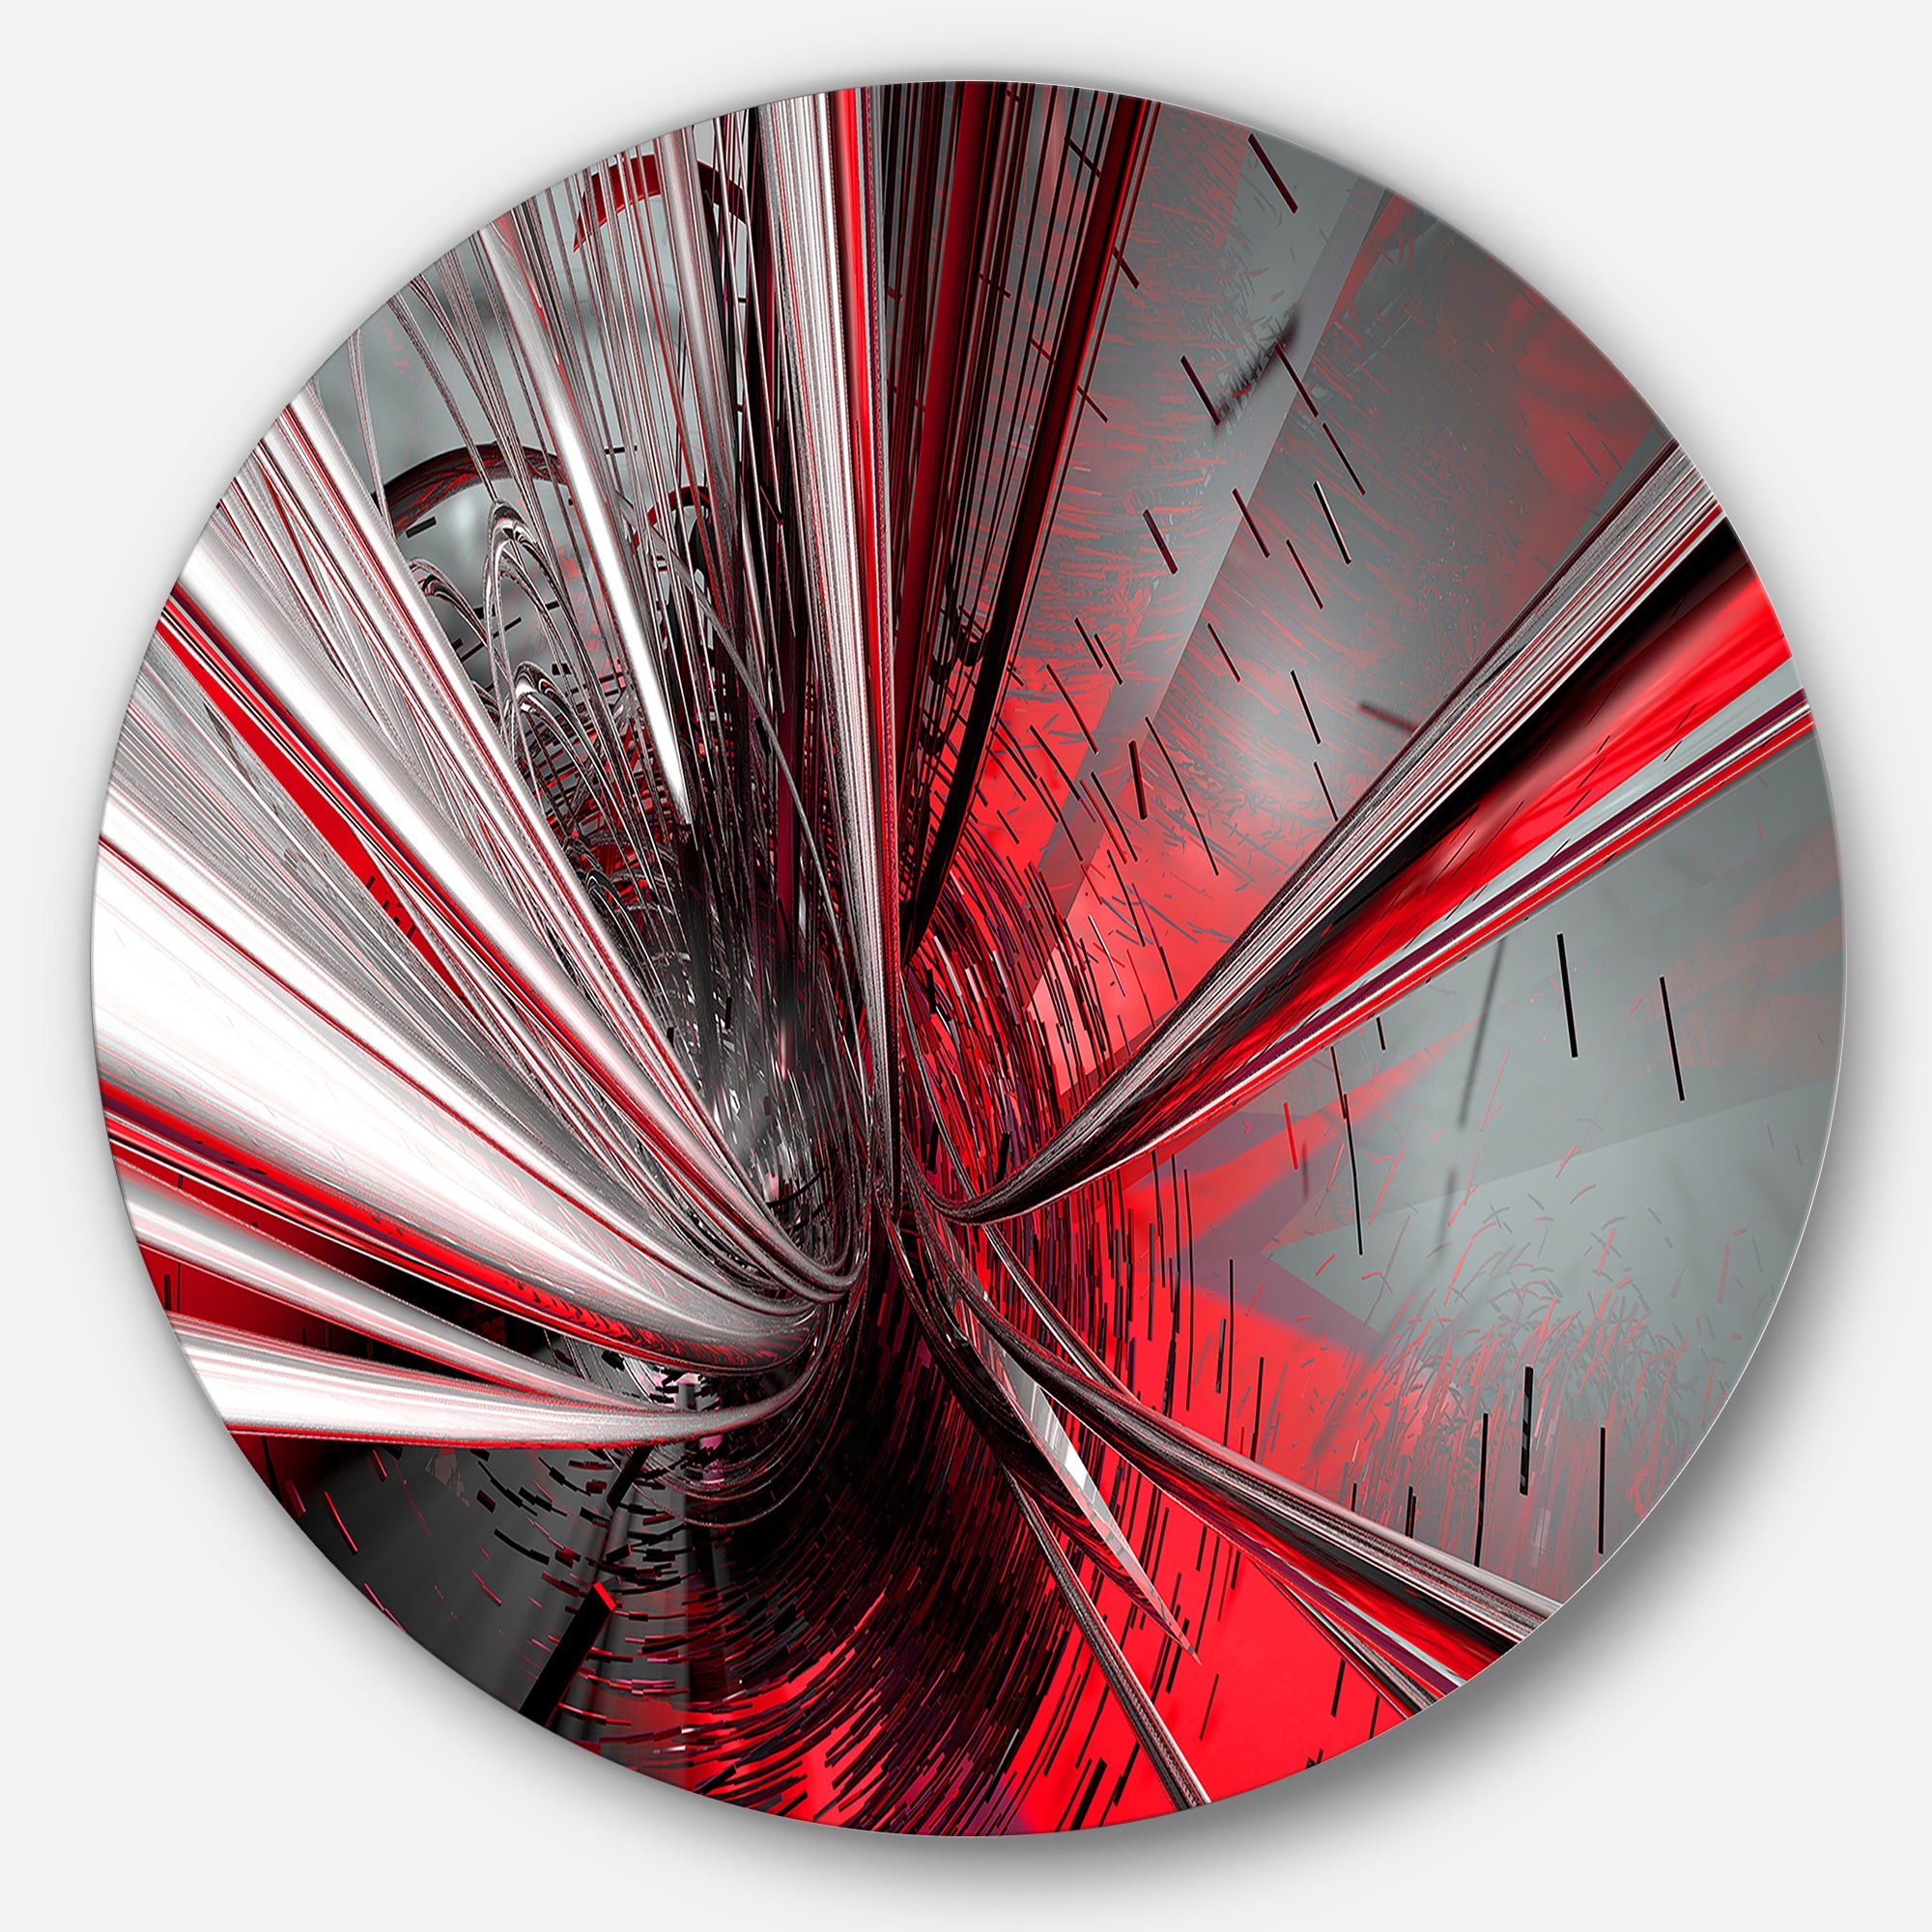 Fractal 3D Deep into Middle' Abstract Circle Metal Wall Art